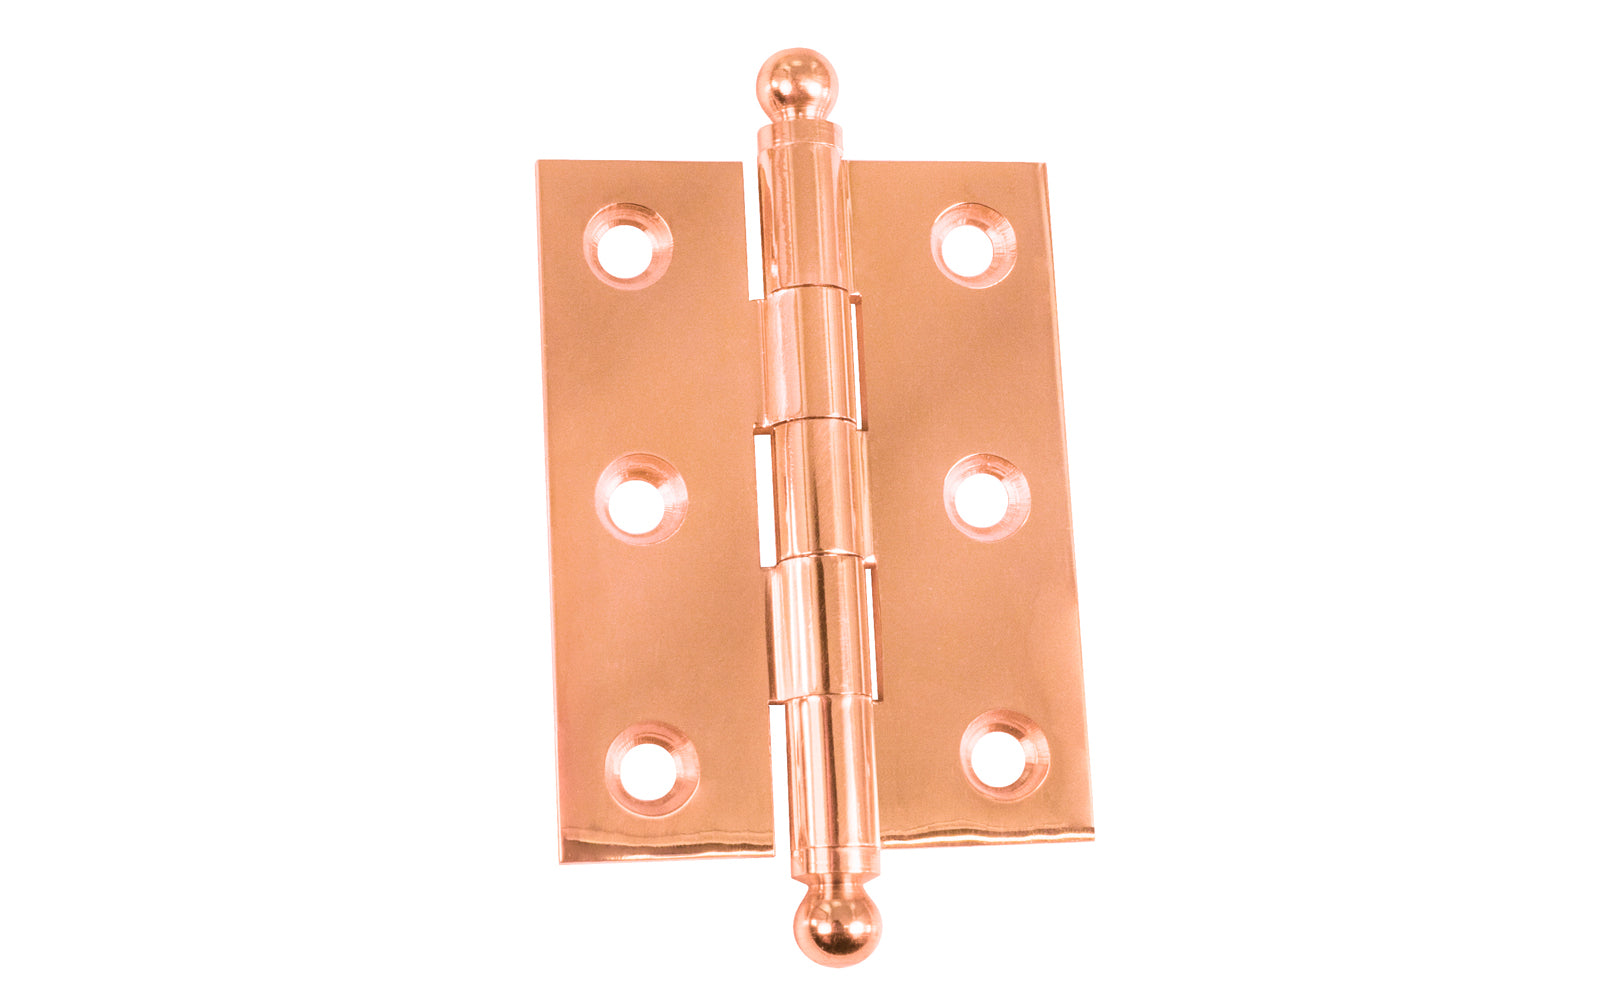 Classic Solid Brass Ball-Tip Cabinet Hinge ~ 2" x 1-1/2". Full mortise extruded hinges. 3/32" heavy duty leaf thickness gauge. Non-removable fixed hinge pin with ball tips. High quality thick cabinet hinge with ball tips. Polished Copper finish.